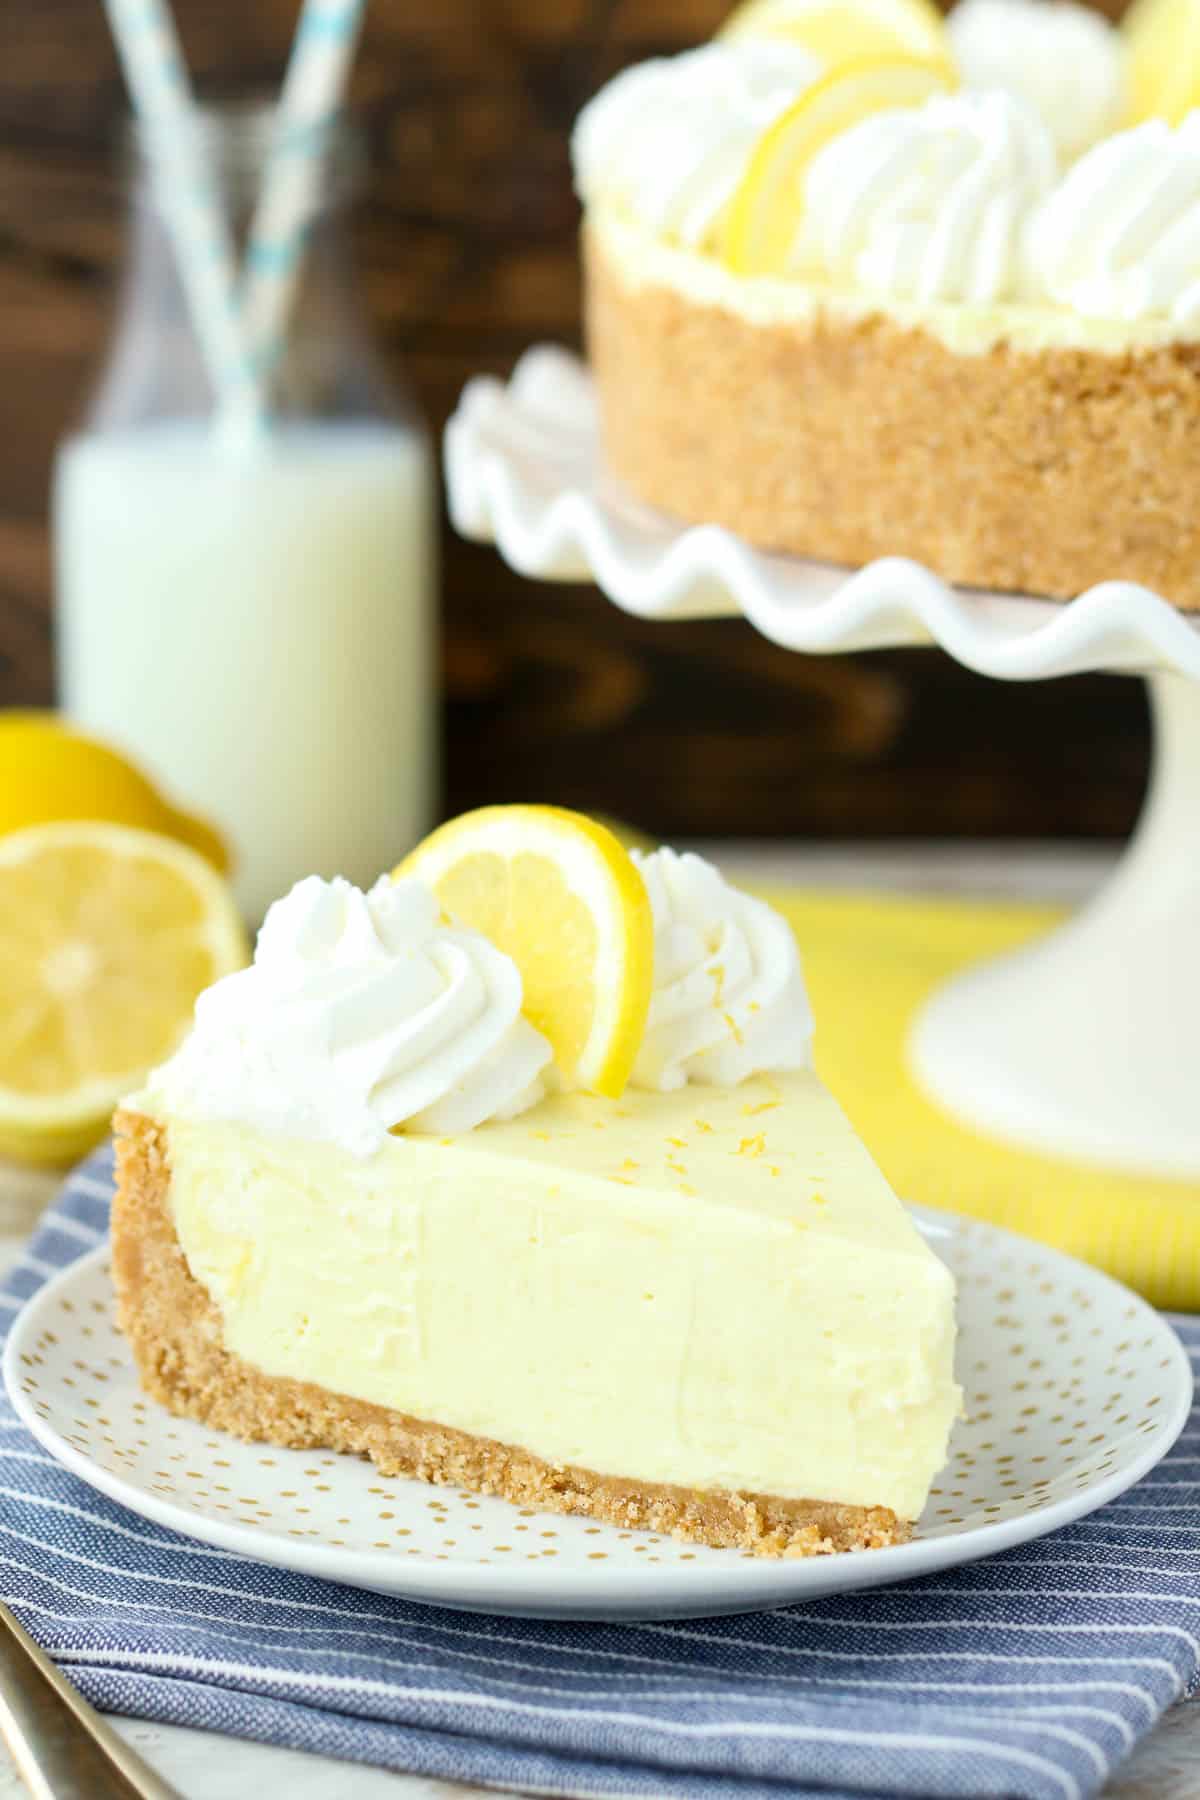 side view of a slice of lemon pie on a plate next to a cake stand with the whole pie